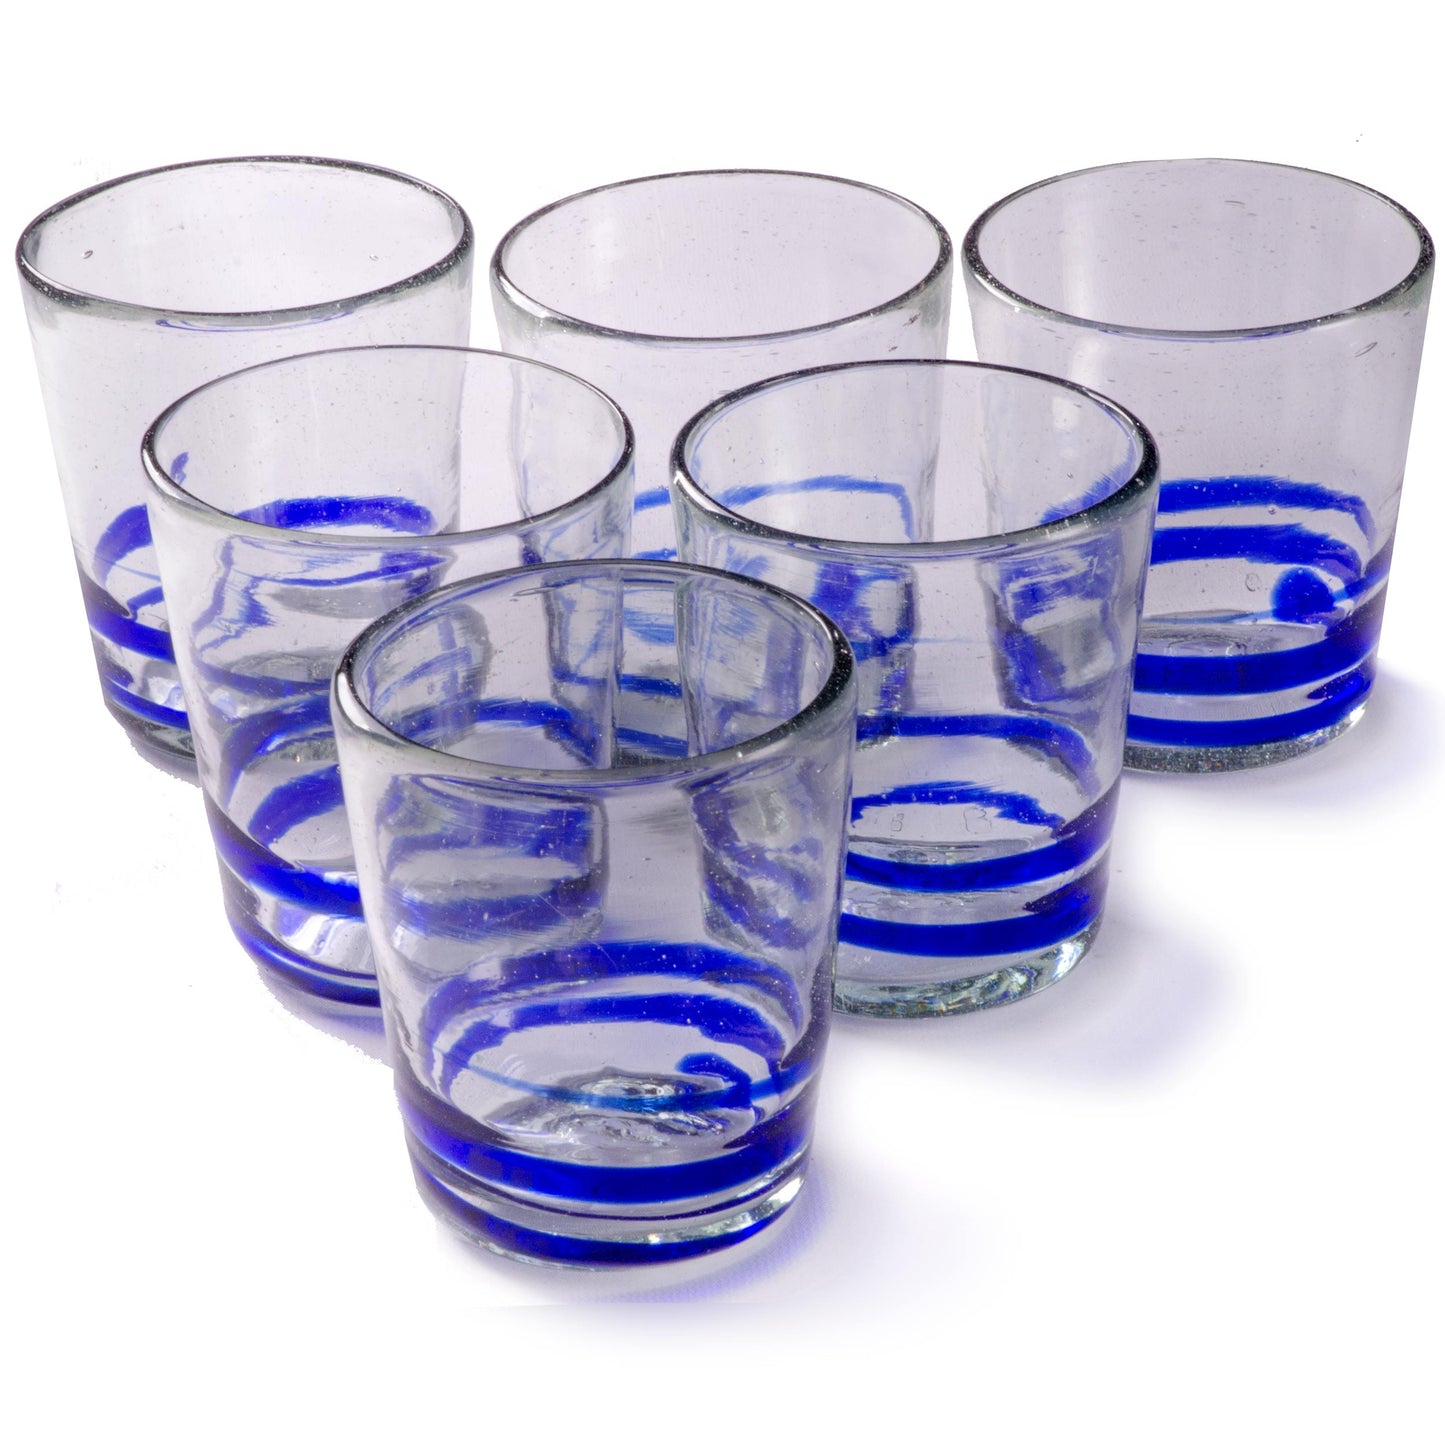 Orion Blue Serpentine 12 oz Short - Set of 6 - Orion's Table Mexican Glassware